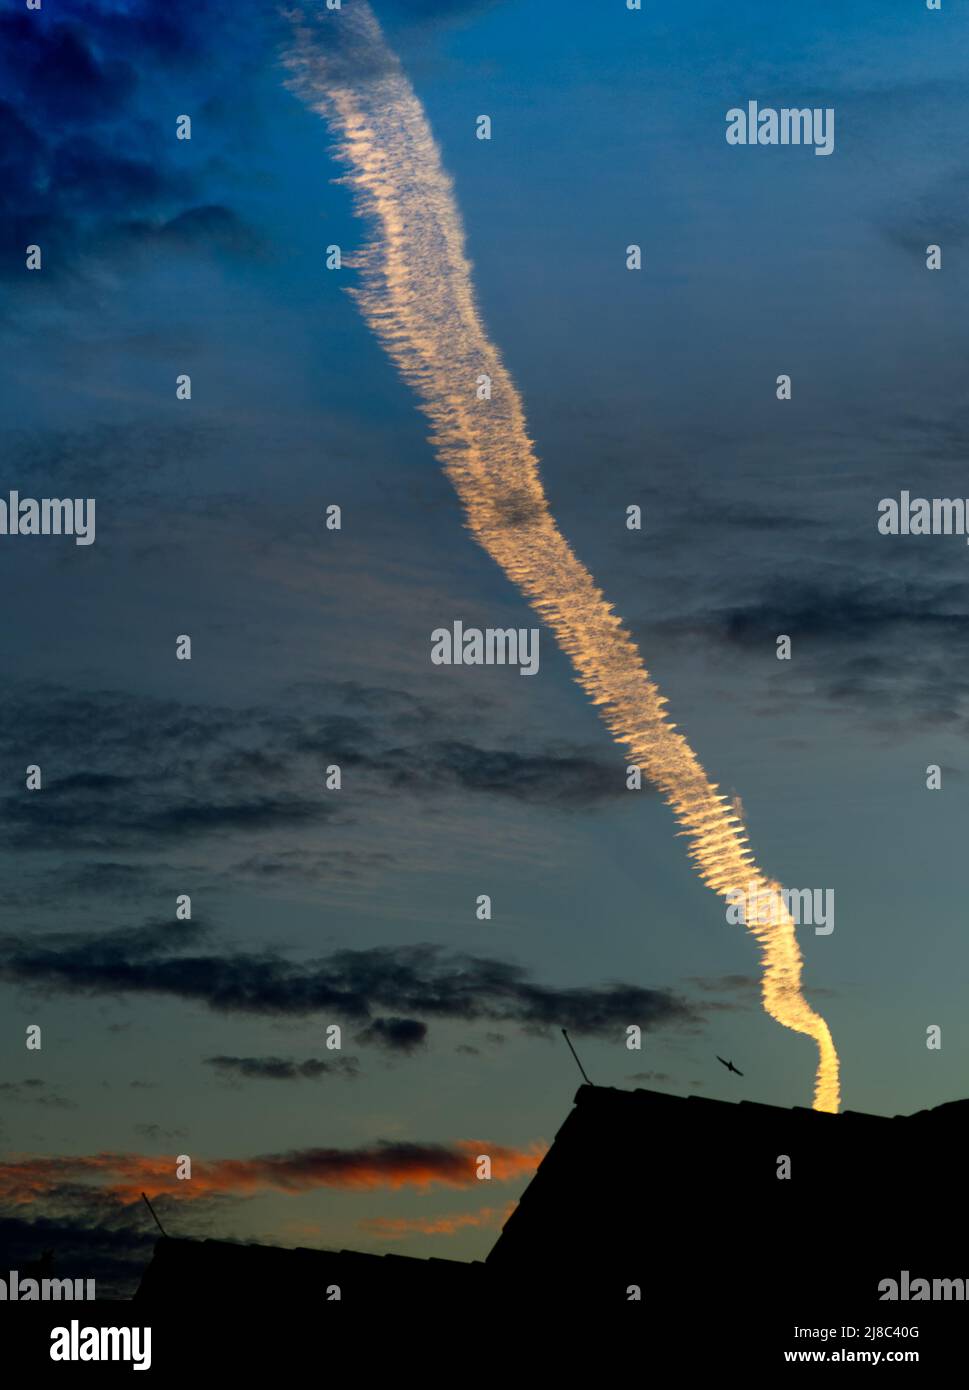 single appealing and luminous condensation trail in bright light orange color above silhouettes of roofs in the dark blue evening sky (upright format) Stock Photo